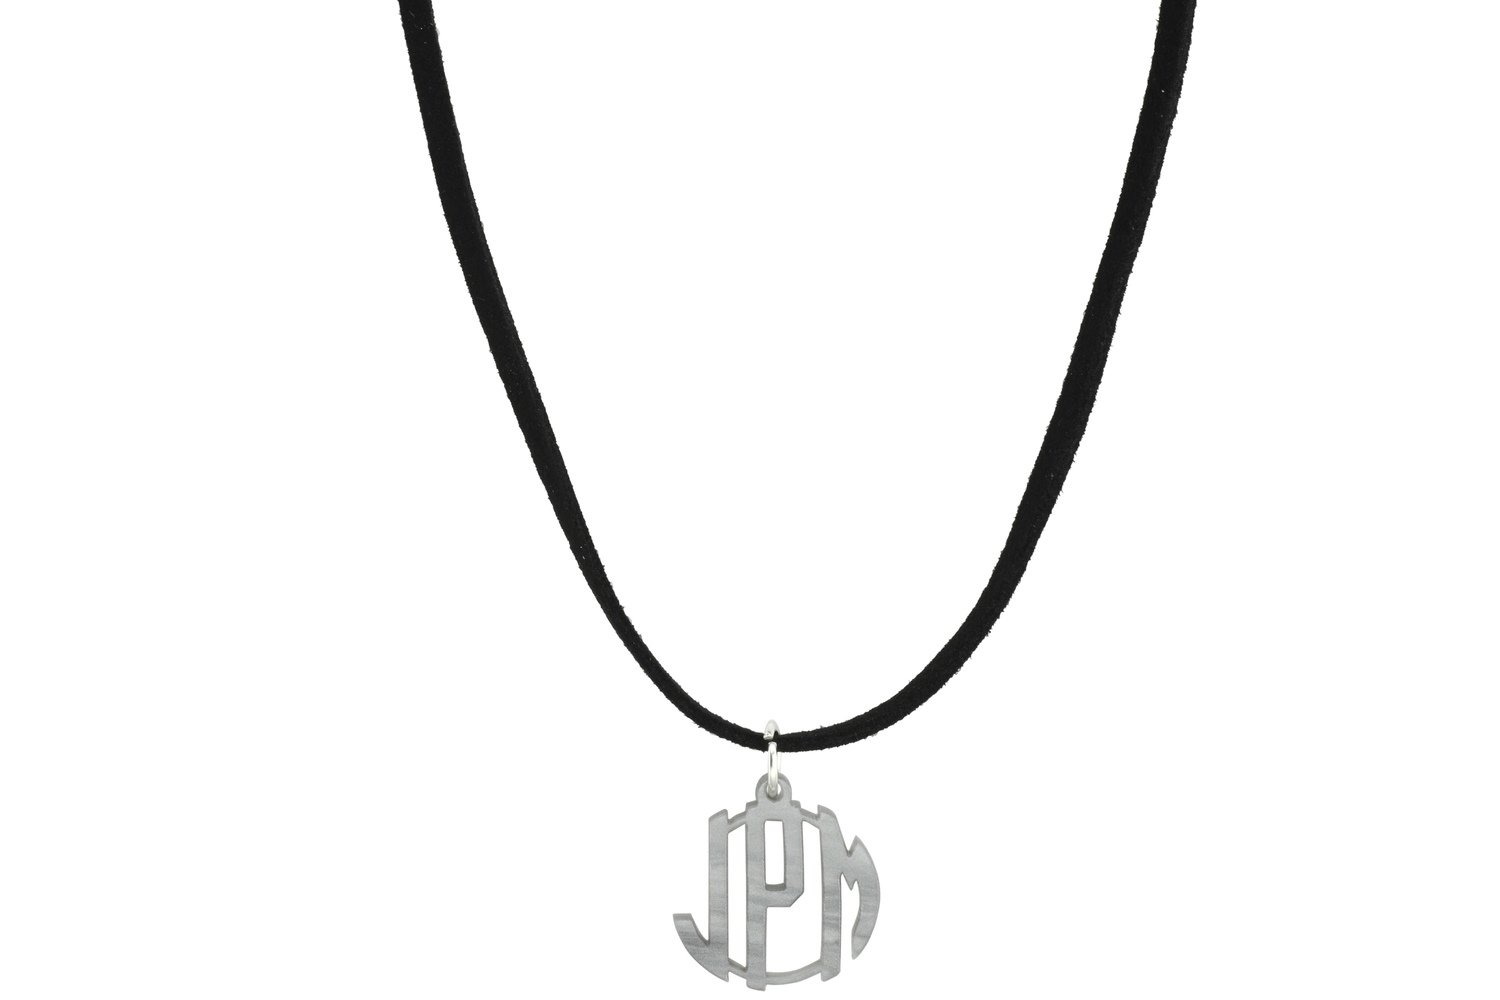 Clean Block Monogram with Suede Leather Cord Necklace